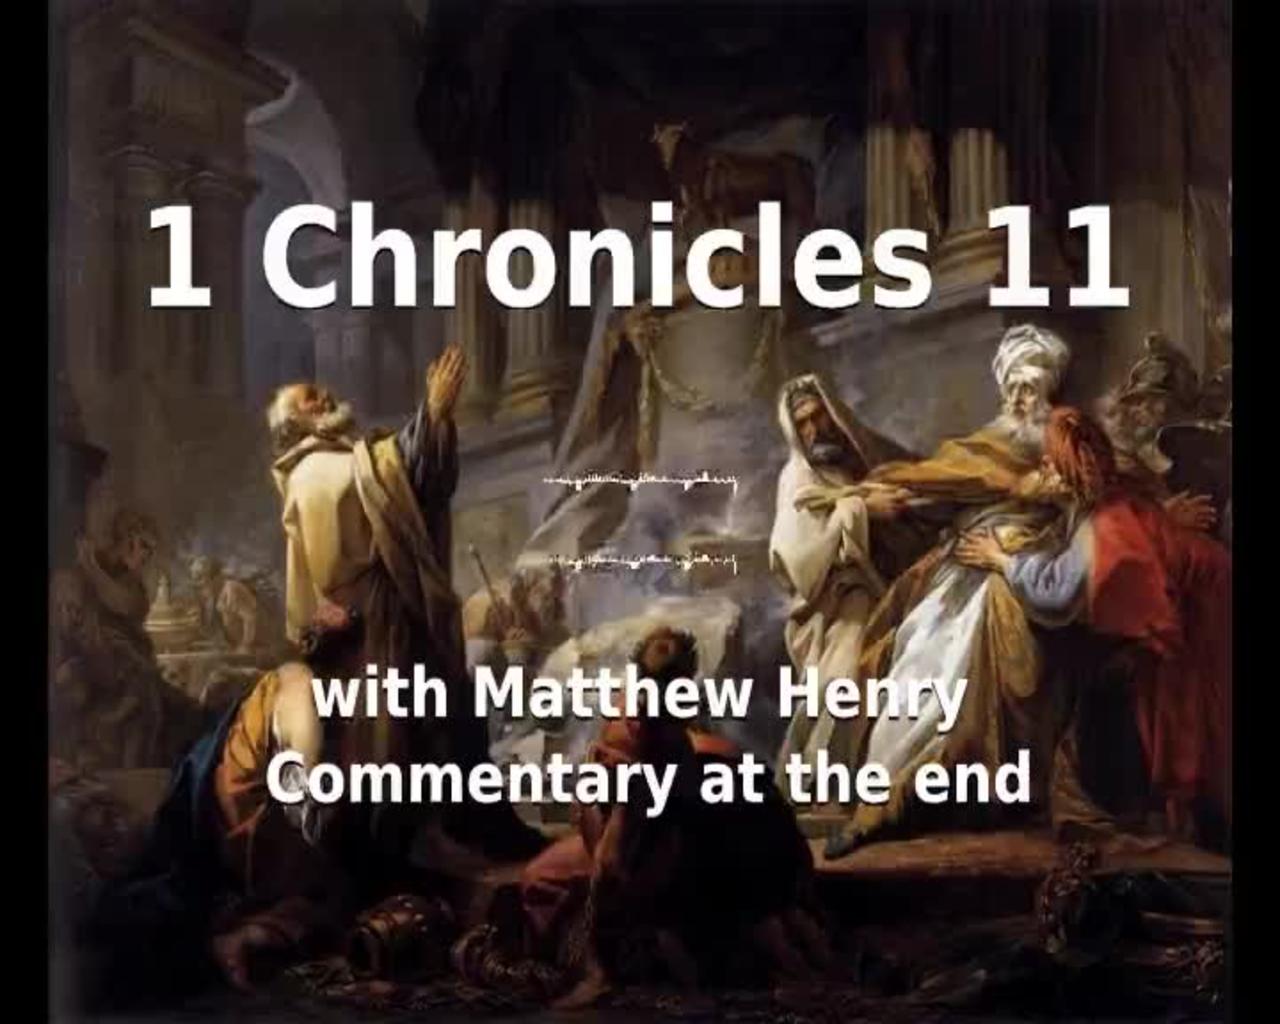 📖🕯 Holy Bible - 1 Chronicles 11 with Matthew Henry Commentary at the end.